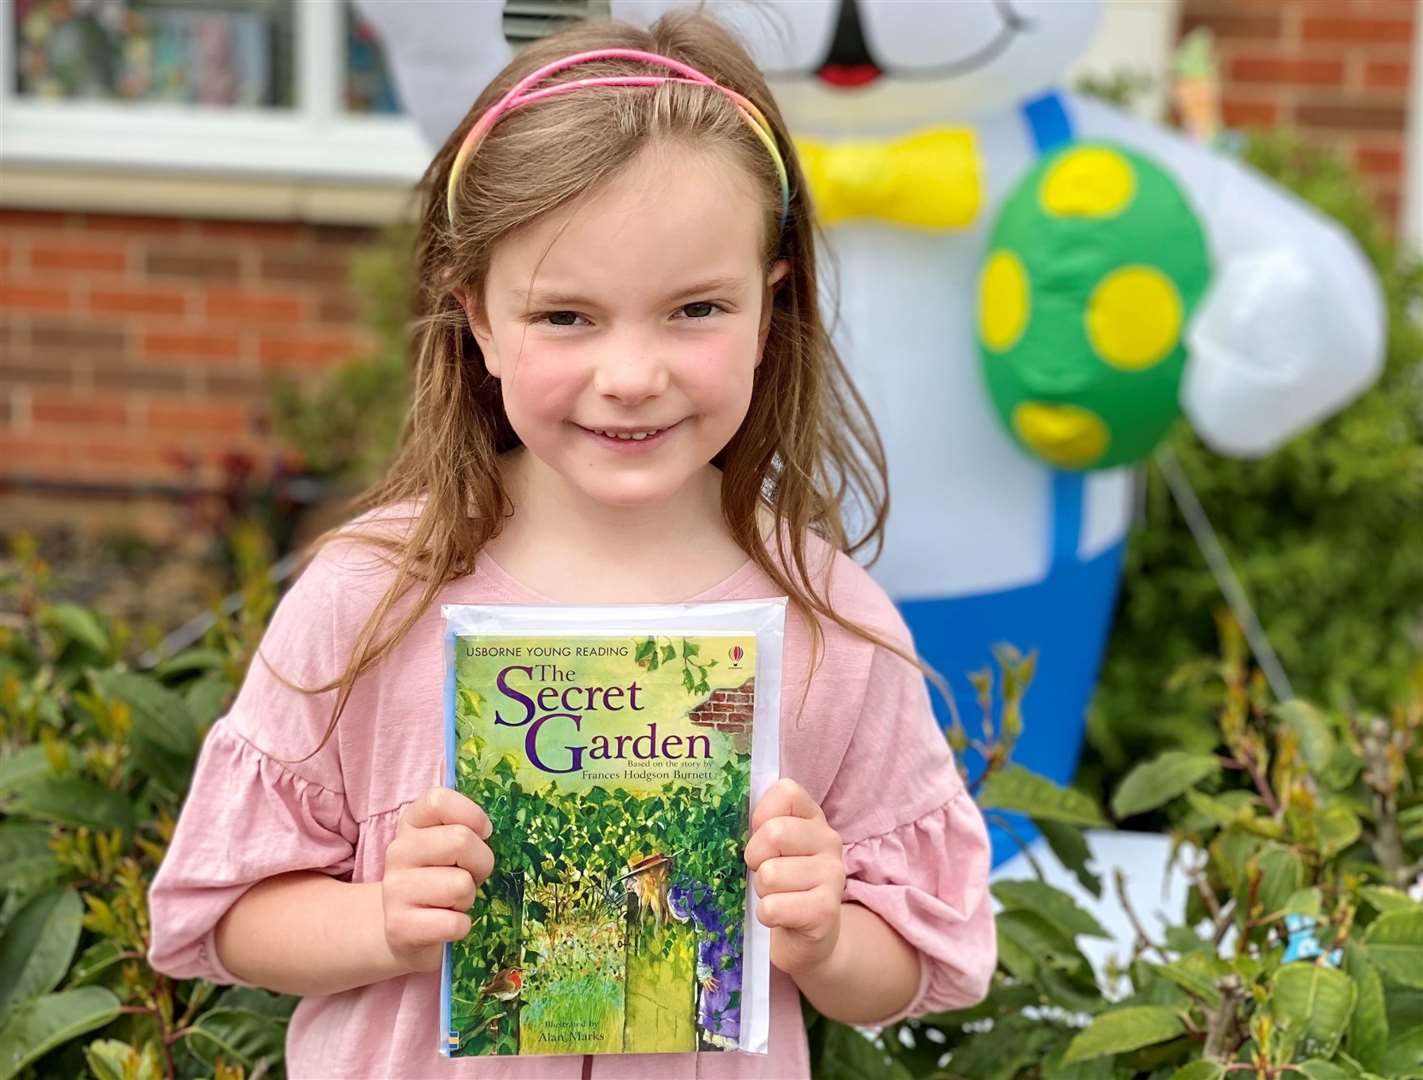 Six-year-old Emelia poses with the book The Secret Garden